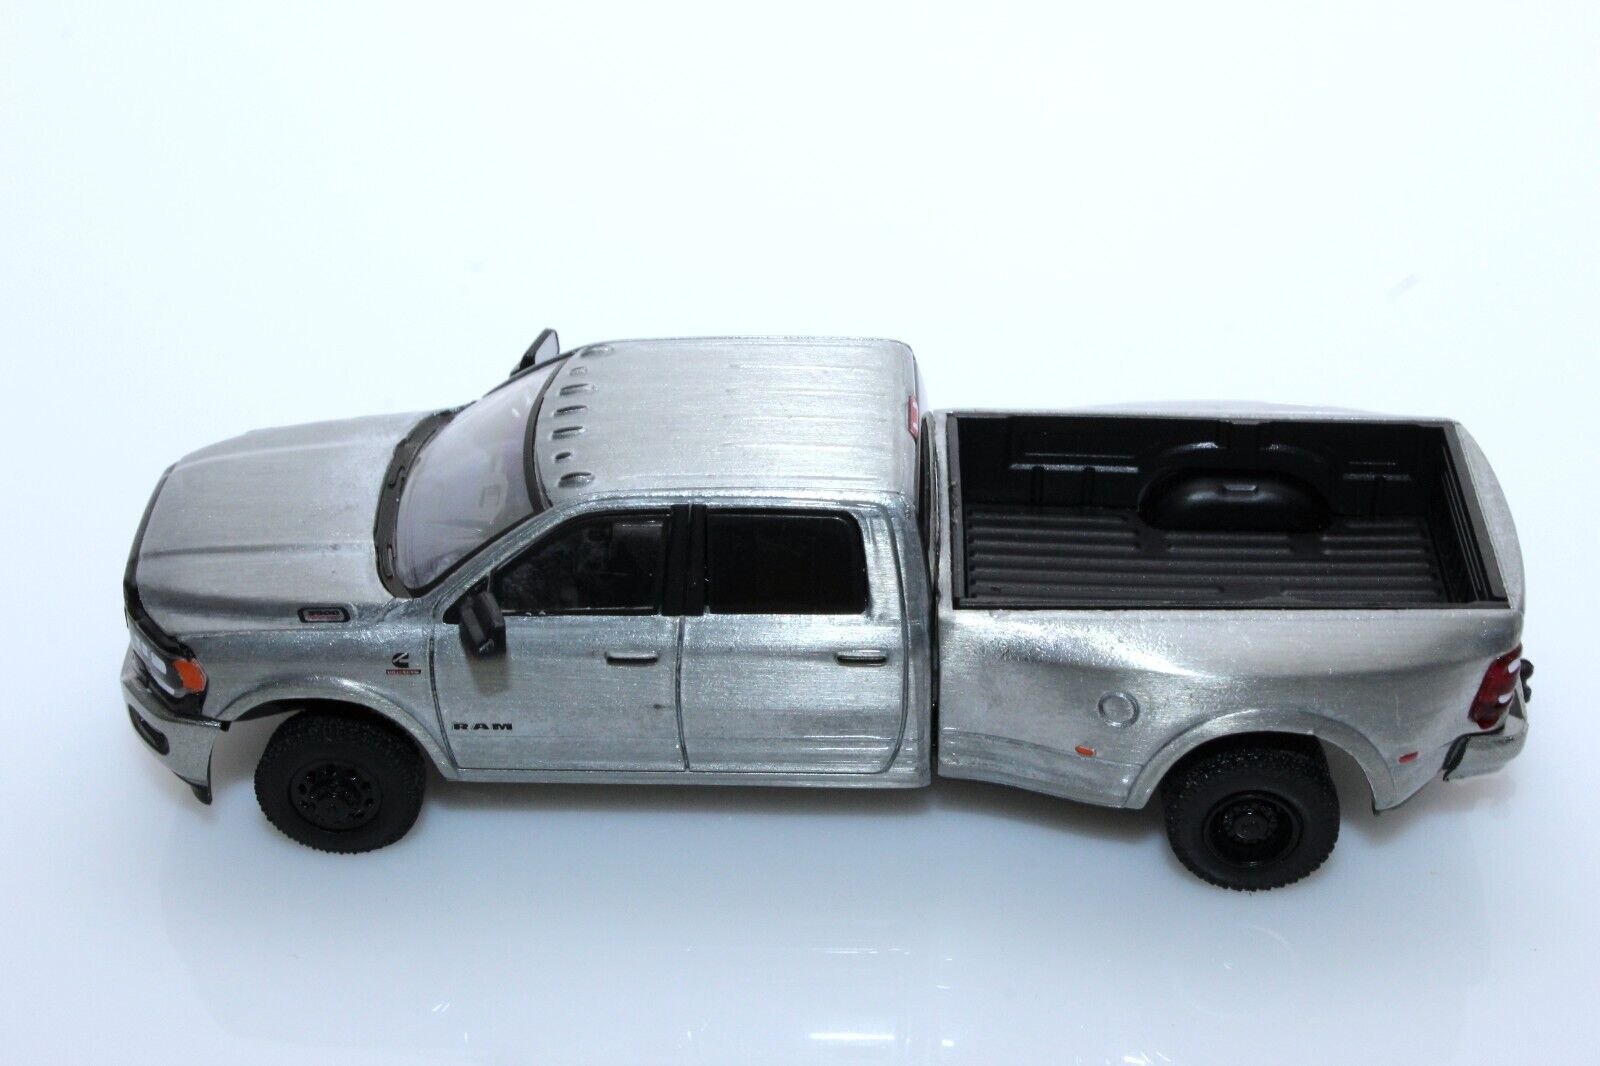 Greenlight 1/64 2021 Dodge Ram Dually Pick-up Truck Limited Night Edition  51472